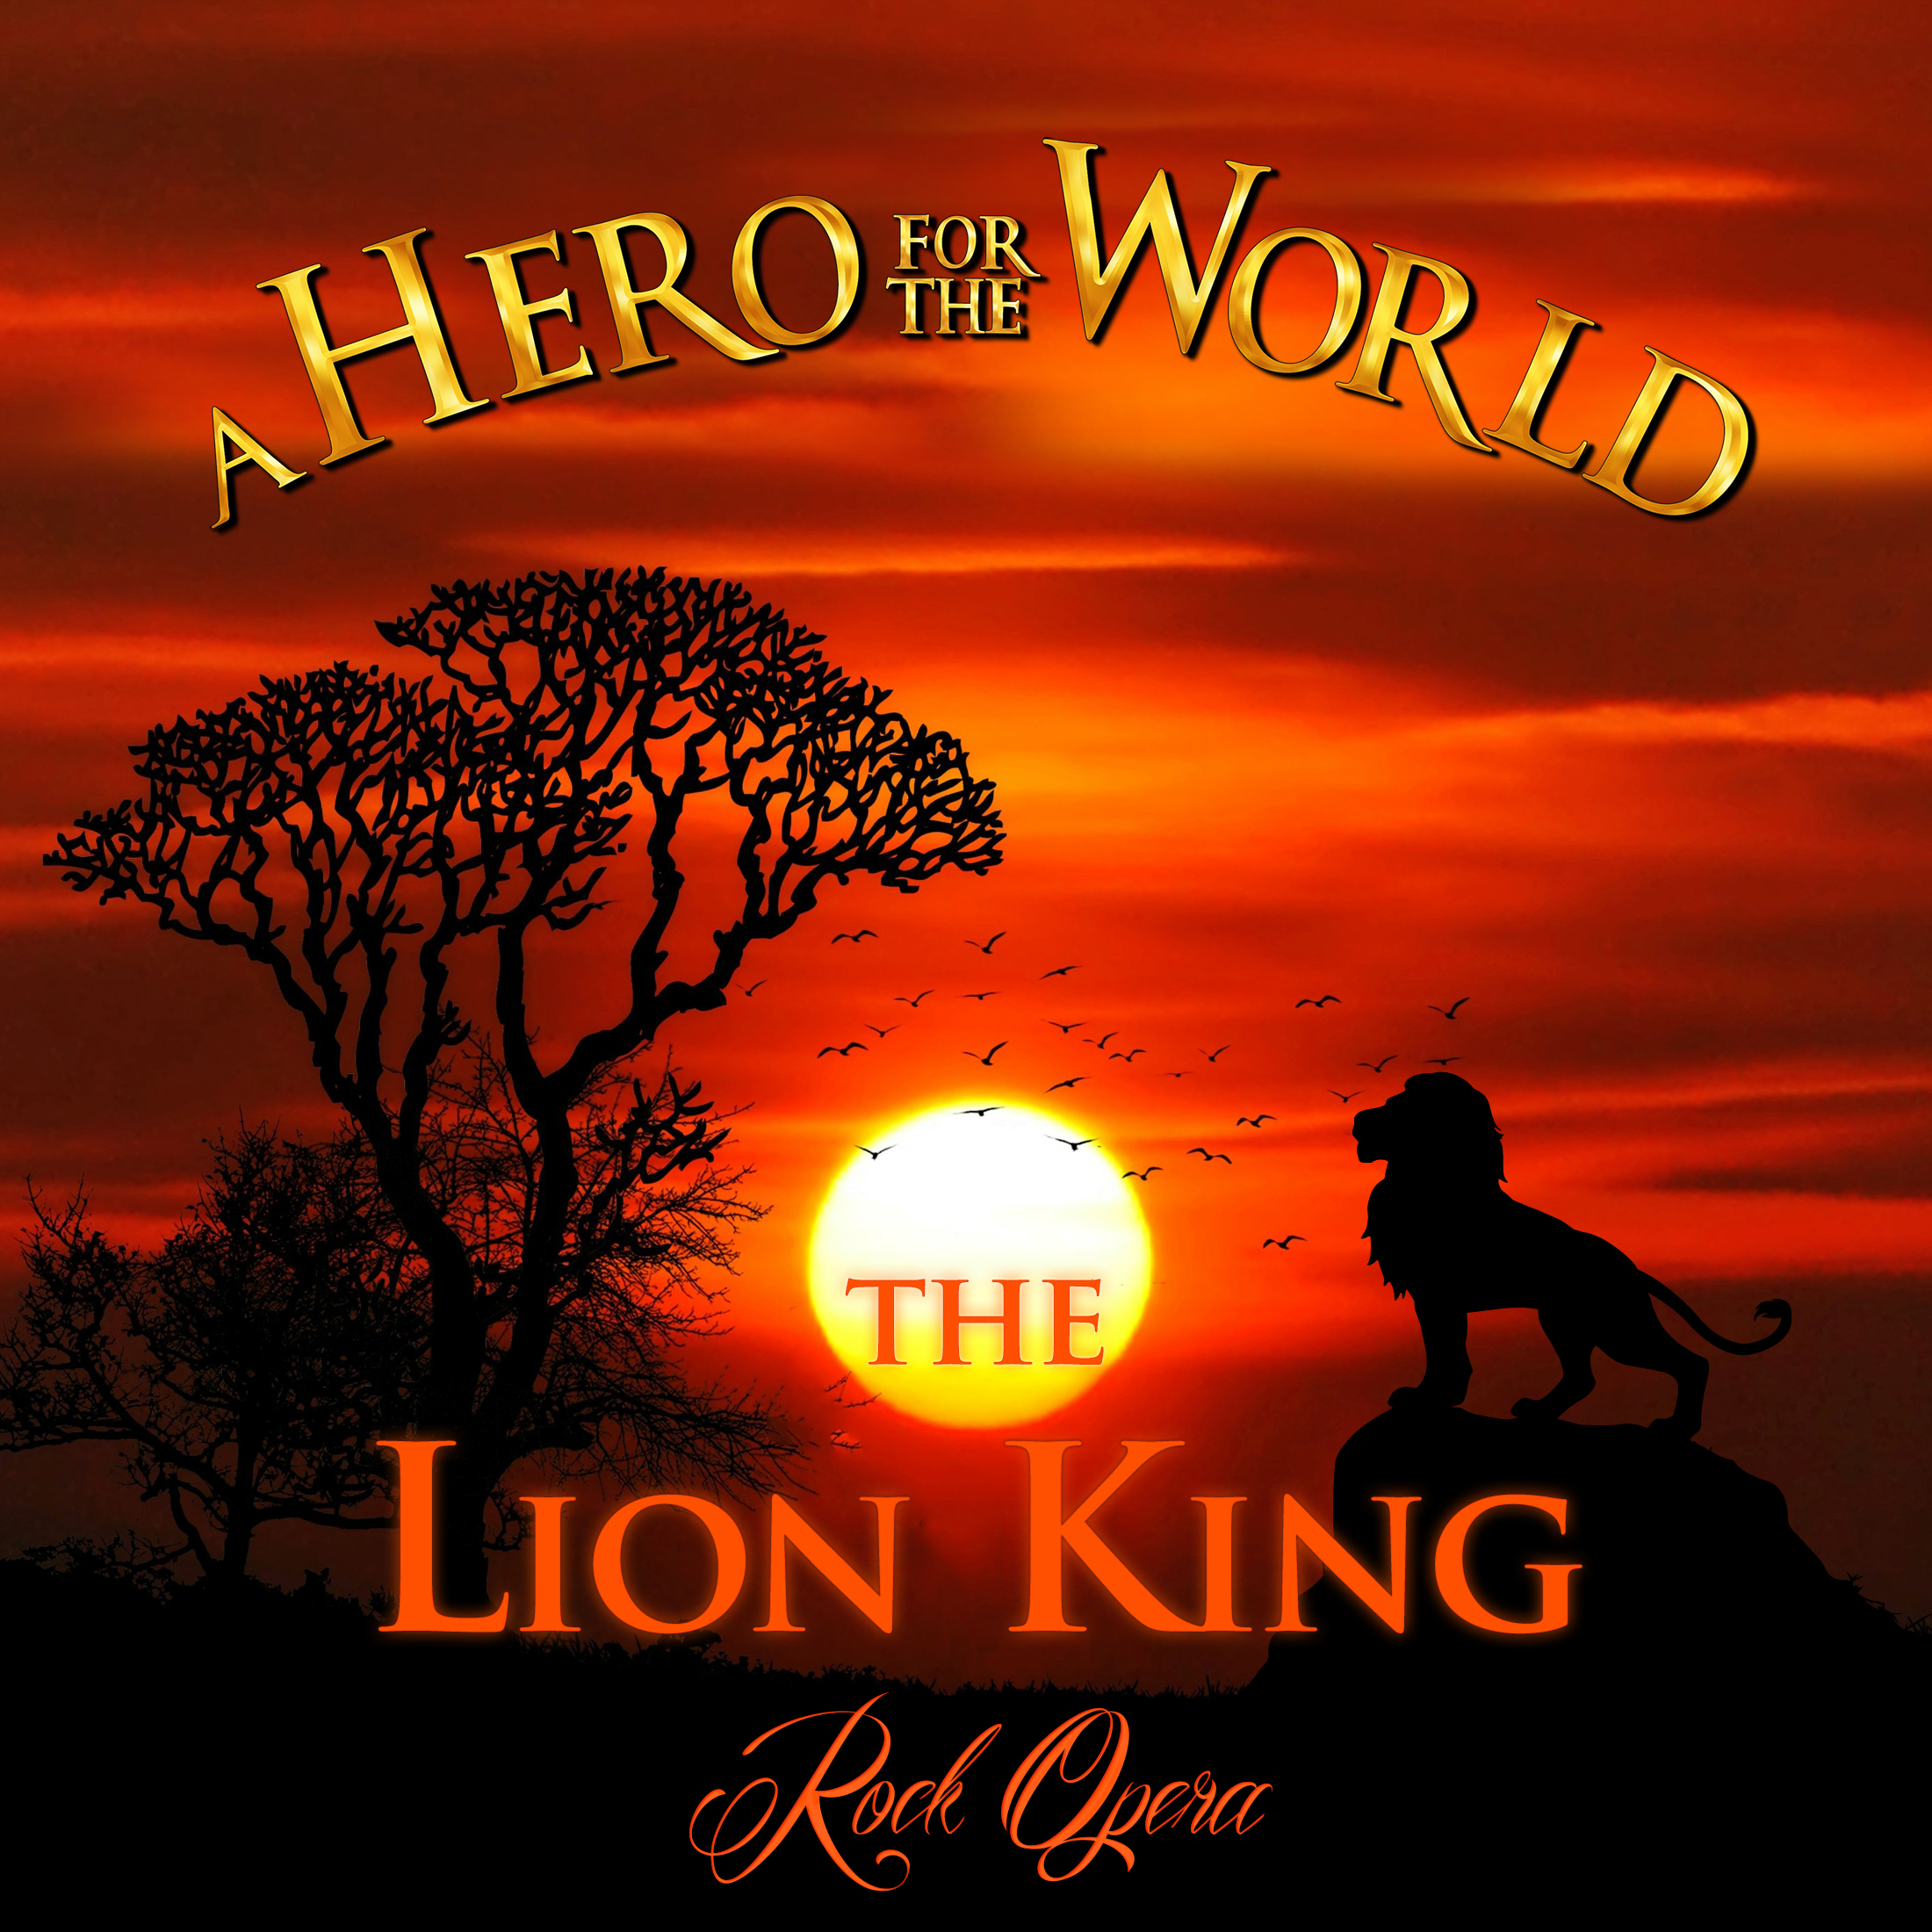 The Lion King Rock Opera - A HERO FOR THE WORLD.jpg